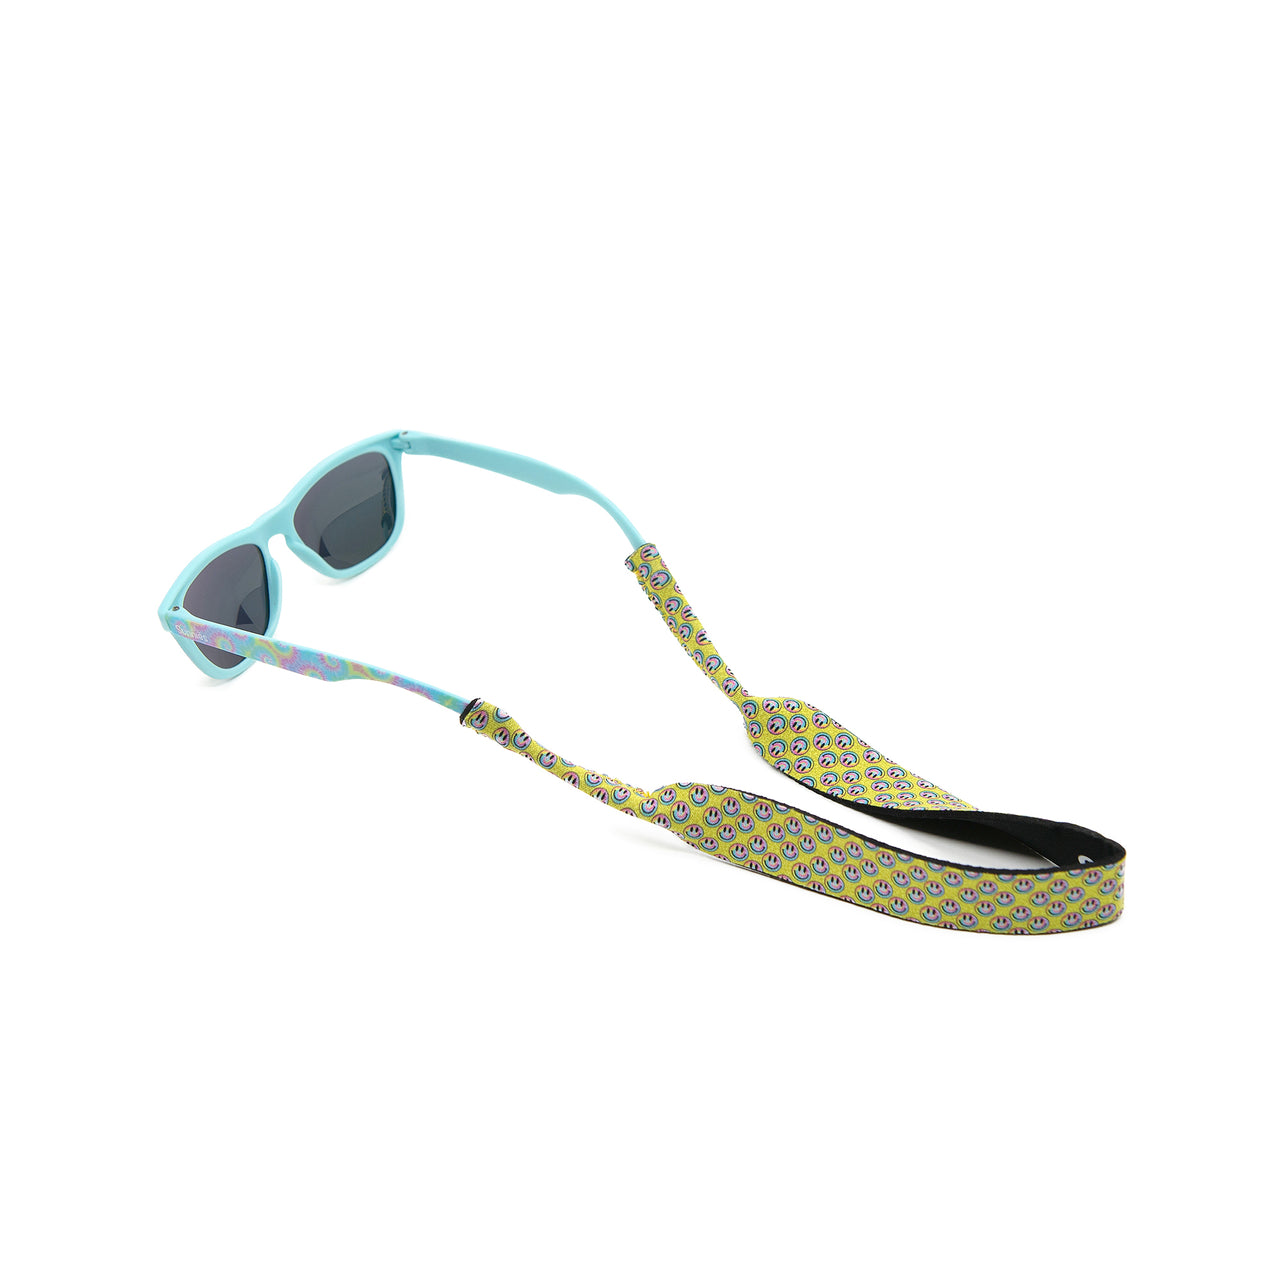 Kids sunglass leash in smiley face pattern in neoprene fabric attached to kids sunglasses